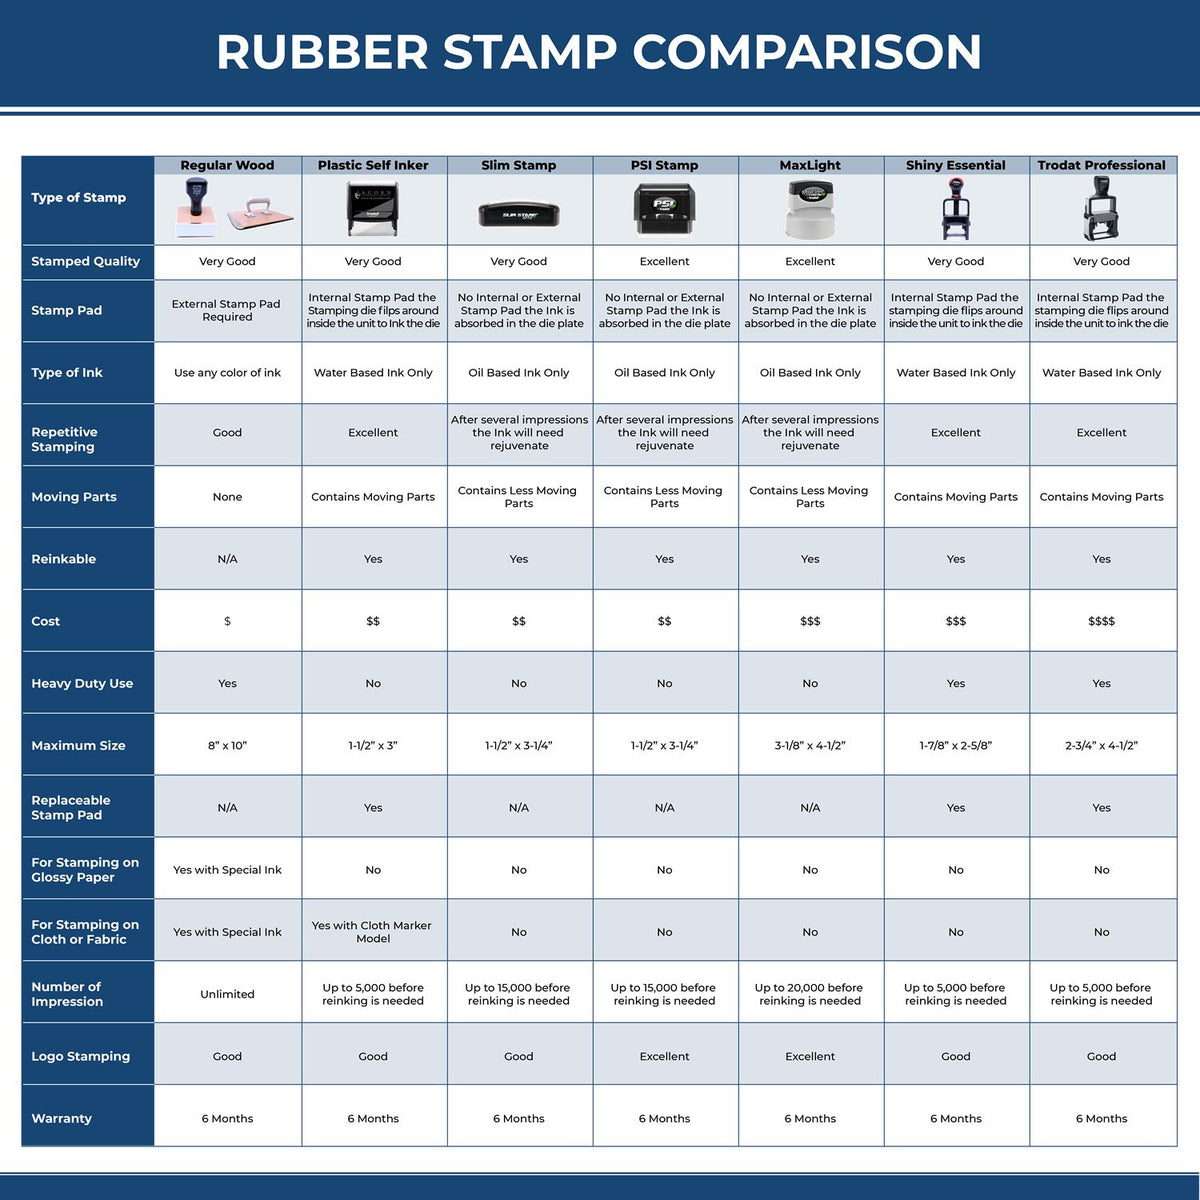 Large Self-Inking Cleaned and Sanitized Stamp 5516S Rubber Stamp Comparison